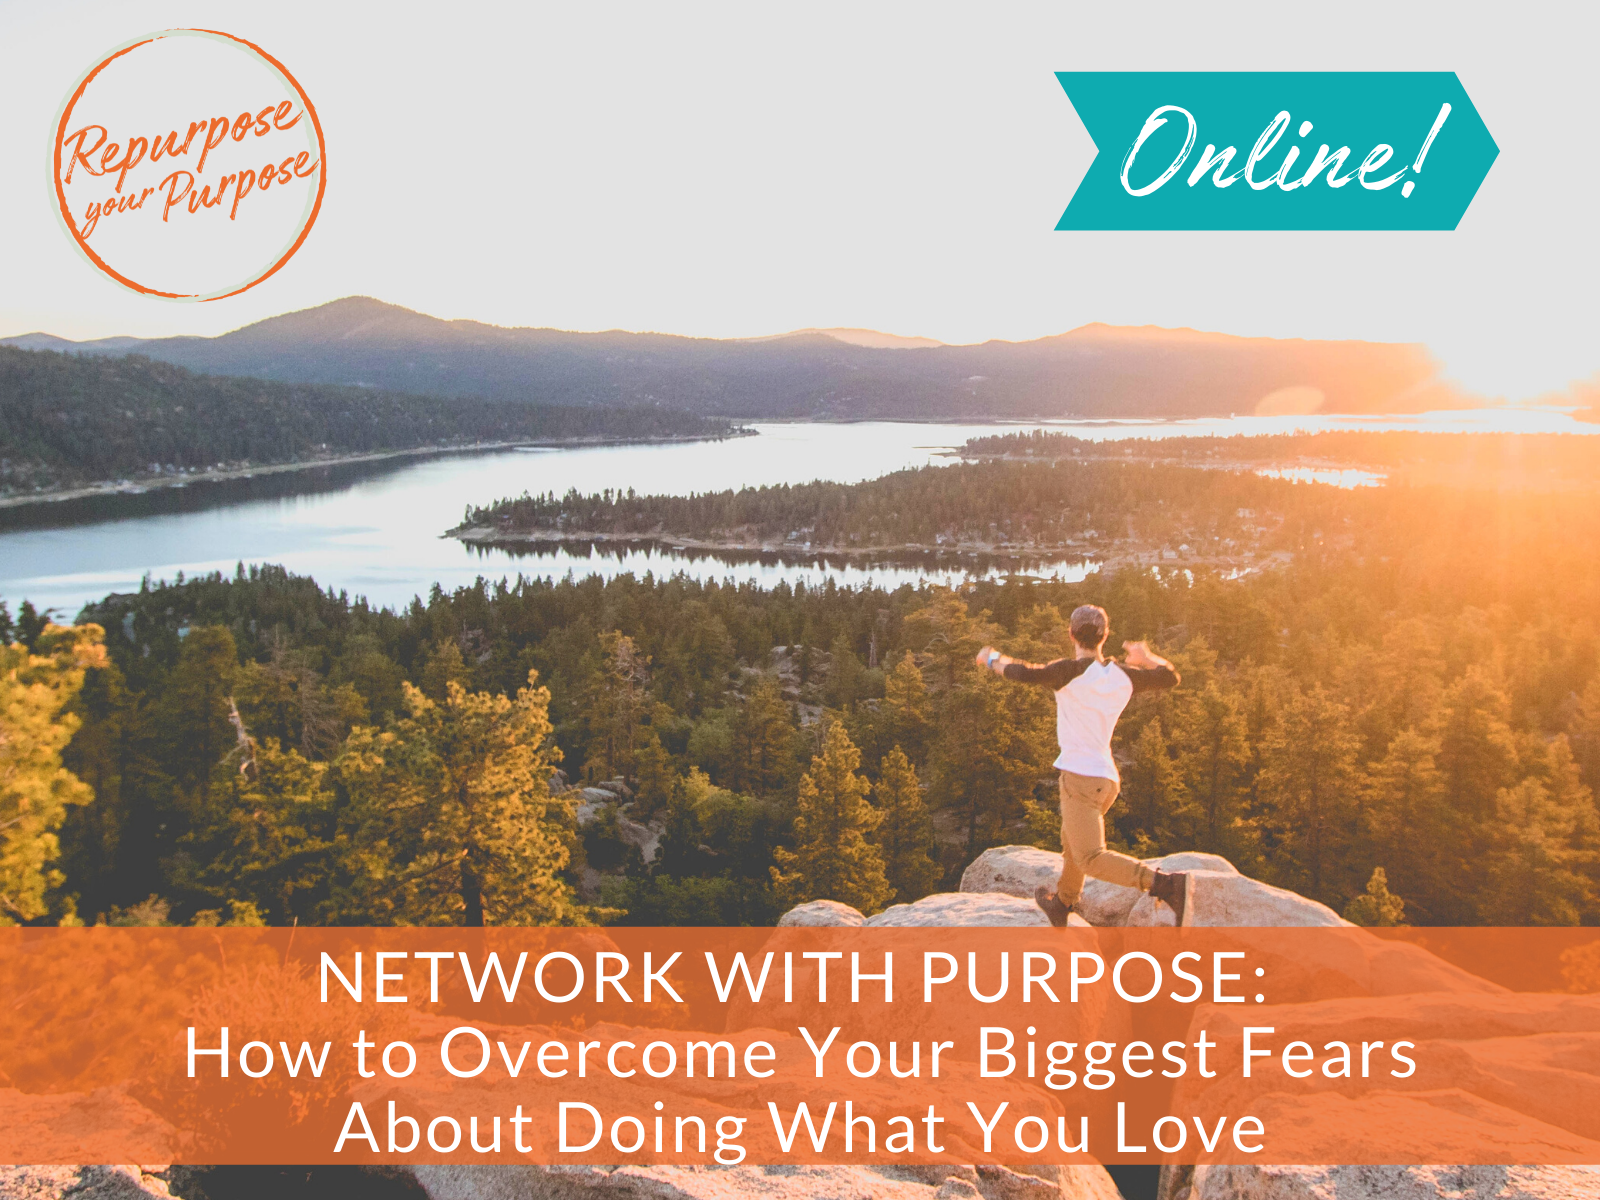 NETWORK WITH PURPOSE: Overcome Your Biggest Fears & Do Work You Love